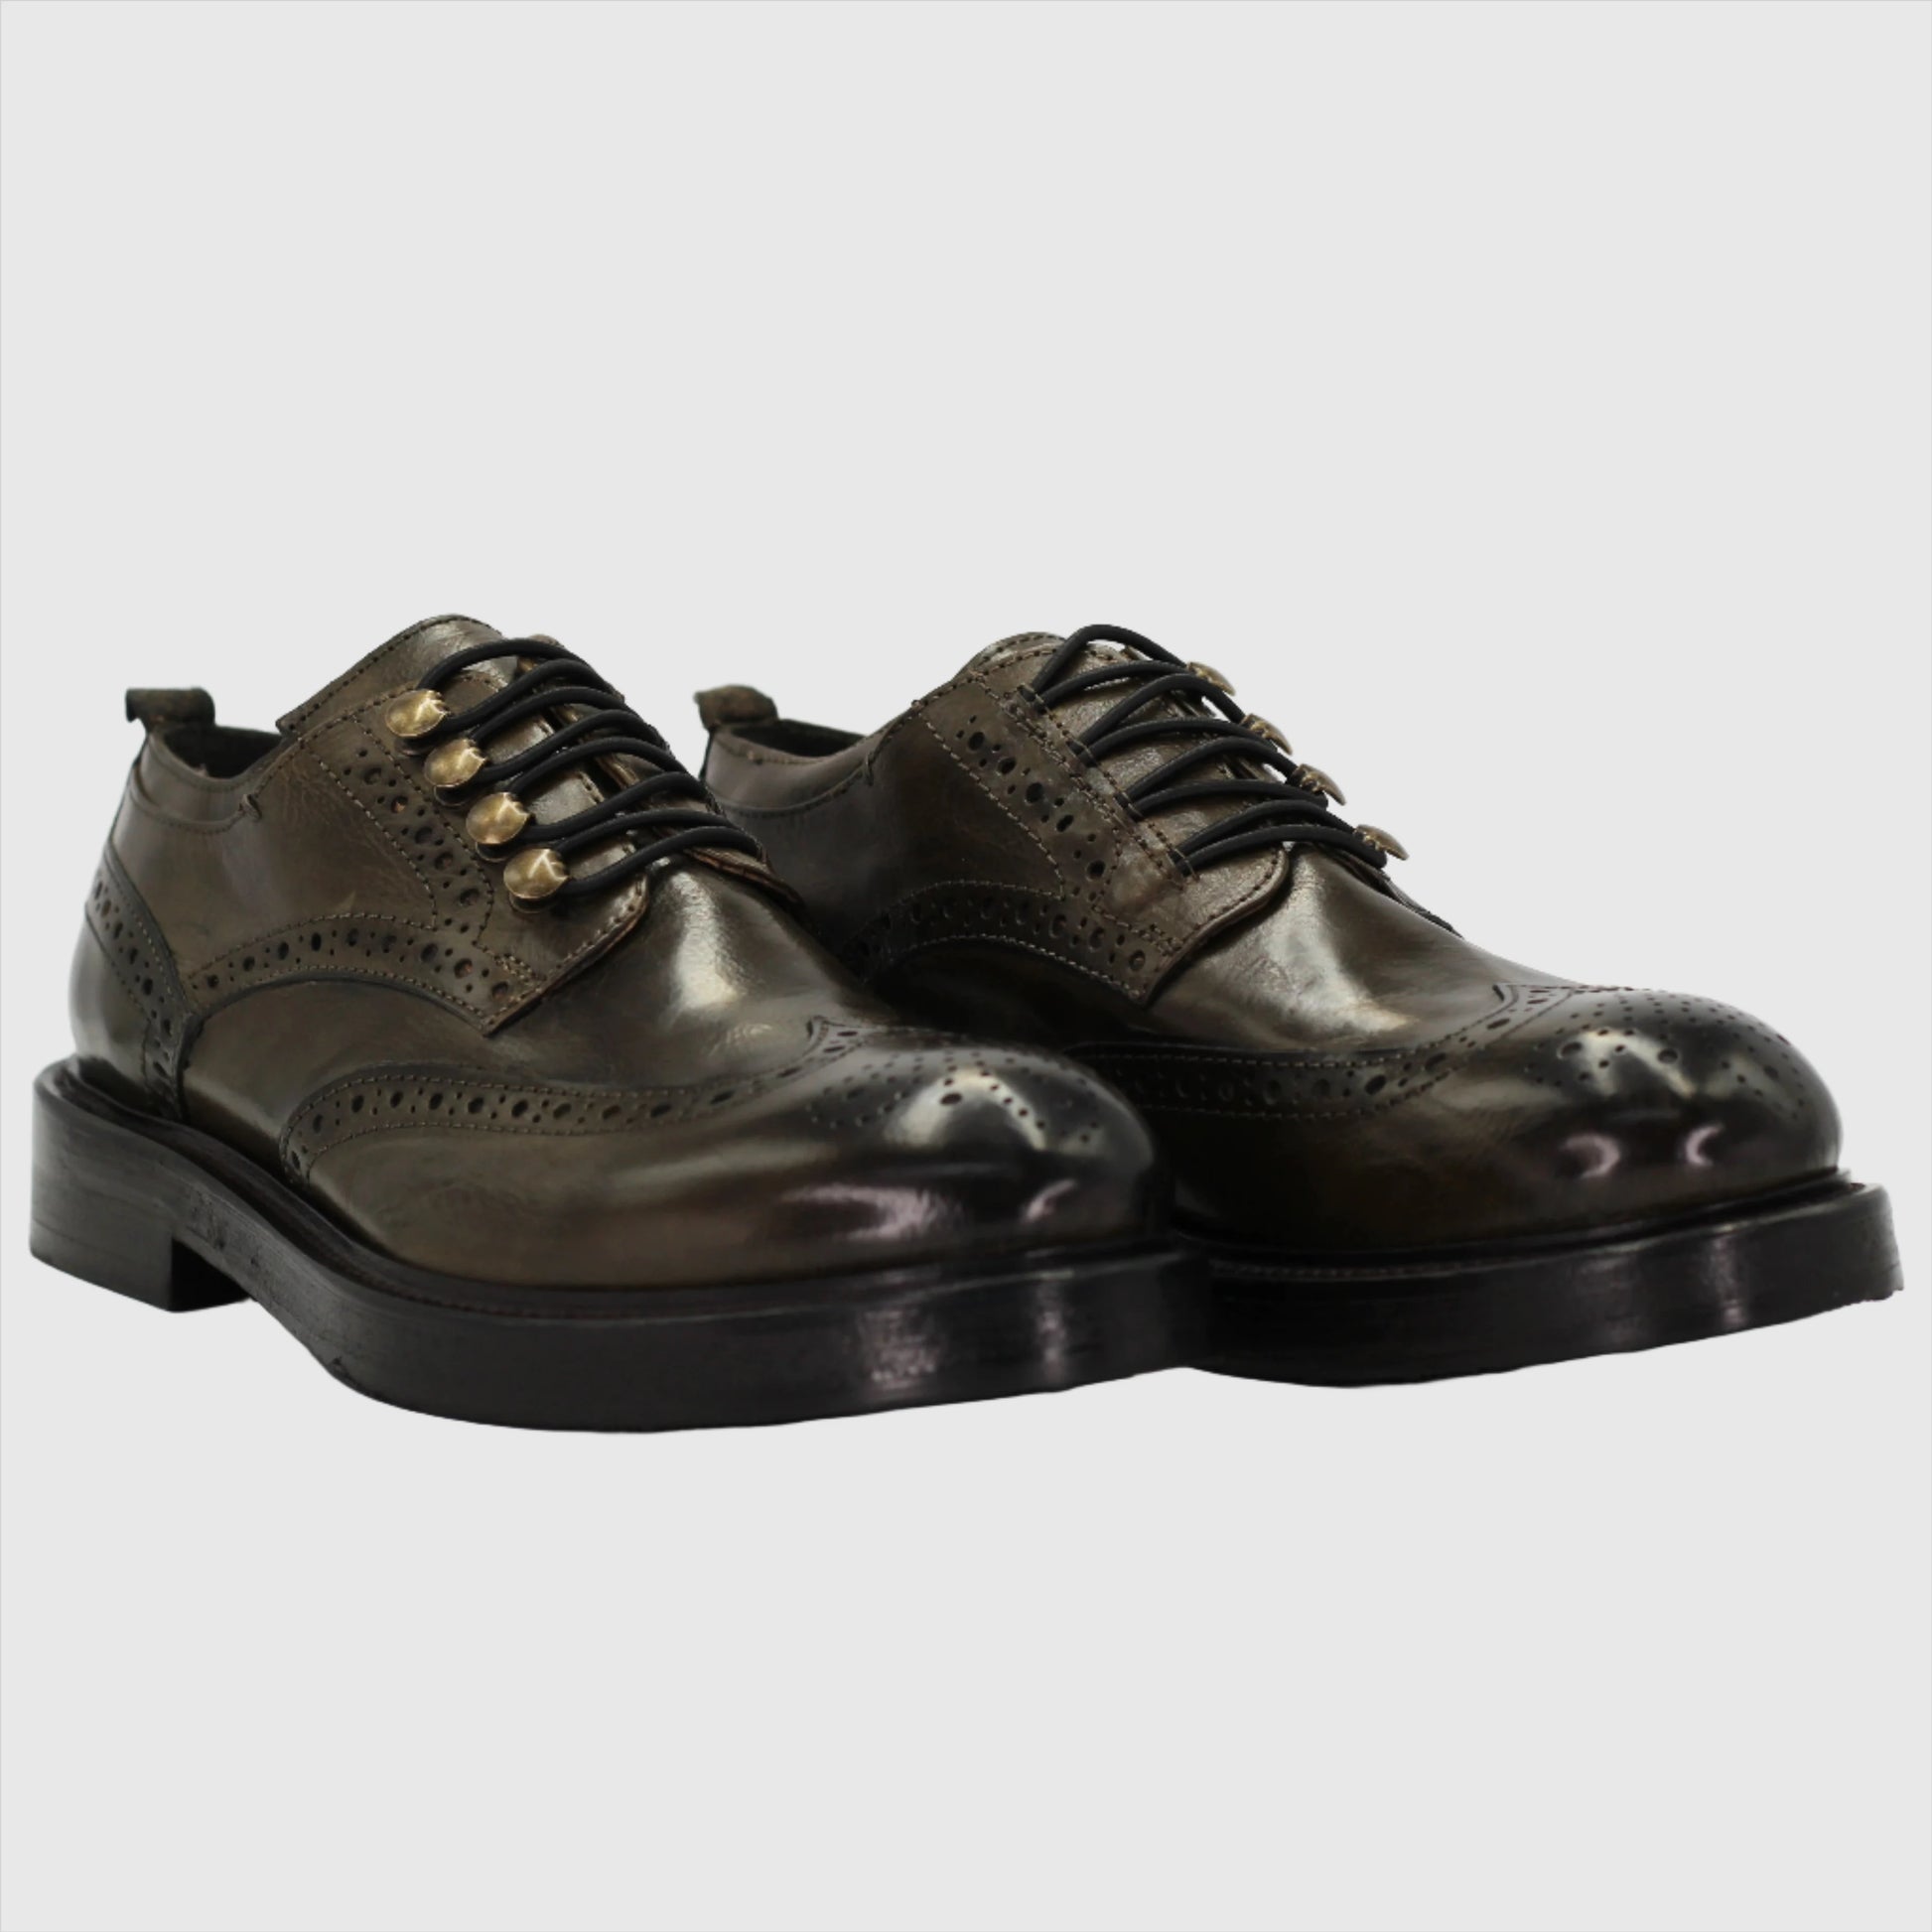 Shop Handmade Italian Leather Women's Oxford Brogue in Verde (JPD37907/1) or browse our range of hand-made Italian shoes in leather or suede in-store at Aliverti Cape Town, or shop online. We deliver in South Africa & offer multiple payment plans as well as accept multiple safe & secure payment methods.